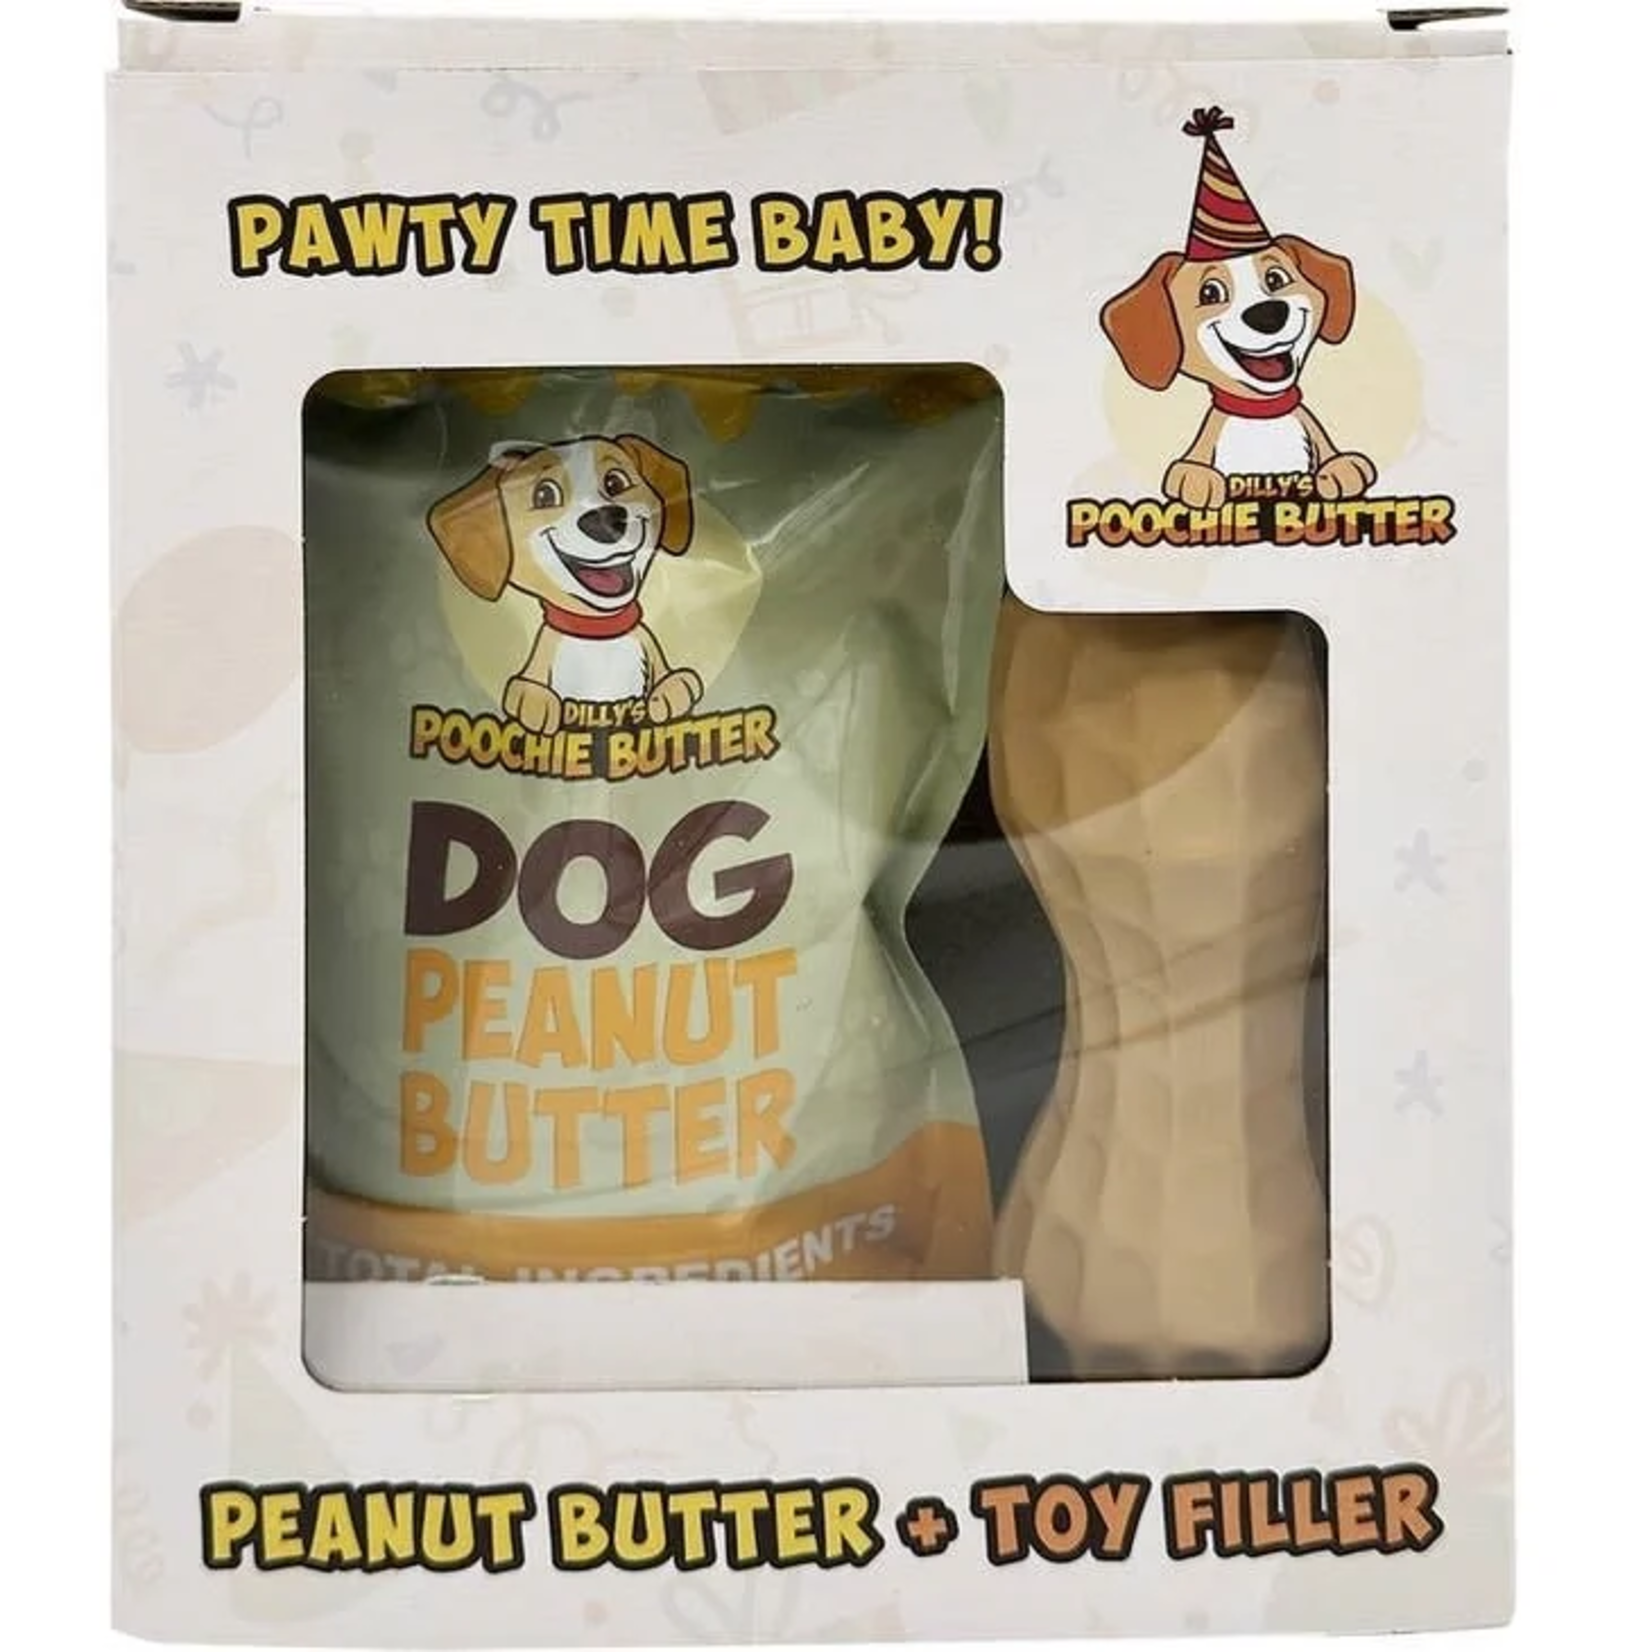 Dilly's Poochie Peanut Butter + Toy Birthday Bundle